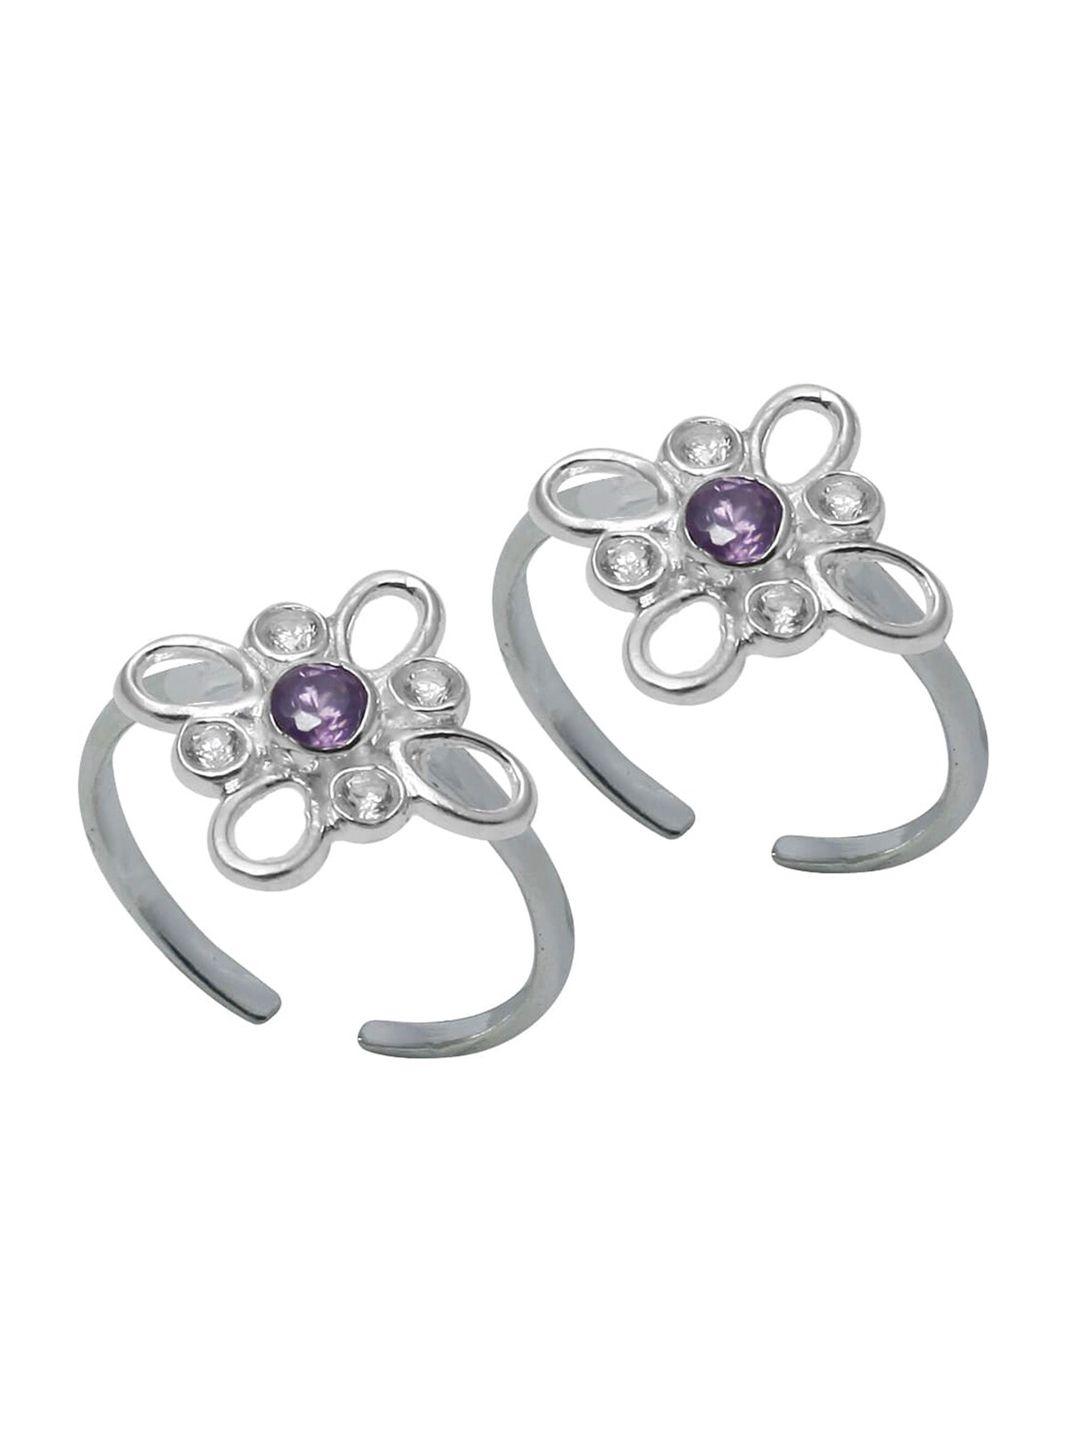 abhooshan set of 2 92.5 sterling silver cz-studded adjustable toe rings